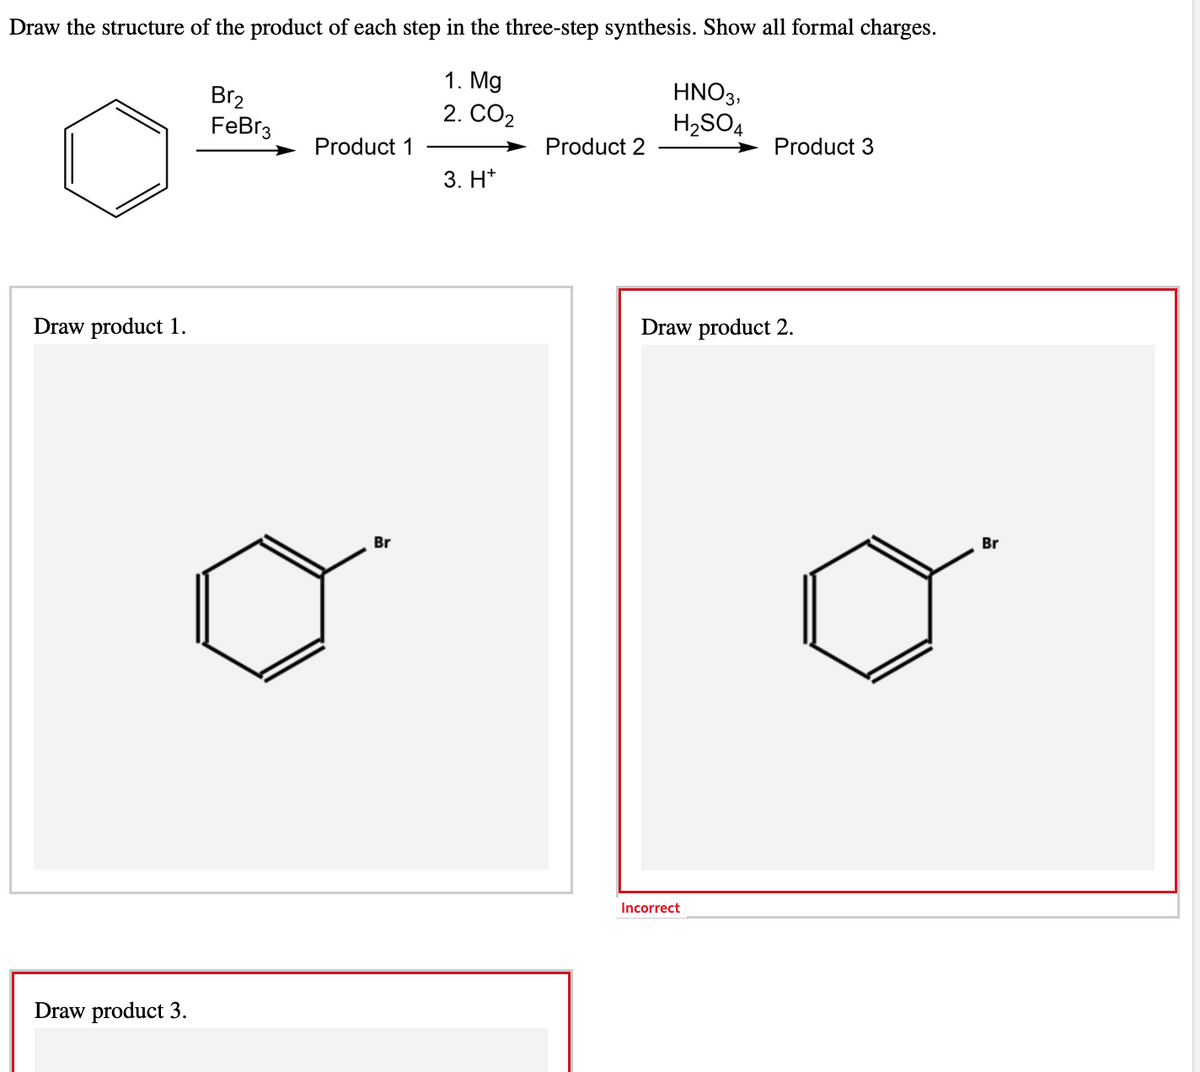 Draw the structure of the product of each step in the three-step synthesis. Show all formal charges.
1. Mg
2. CO₂
Draw product 1.
Draw product 3.
Br₂
FeBr3
Product 1
Br
3. H*
Product 2
HNO3,
H₂SO4
Product 3
Draw product 2.
Incorrect
Br